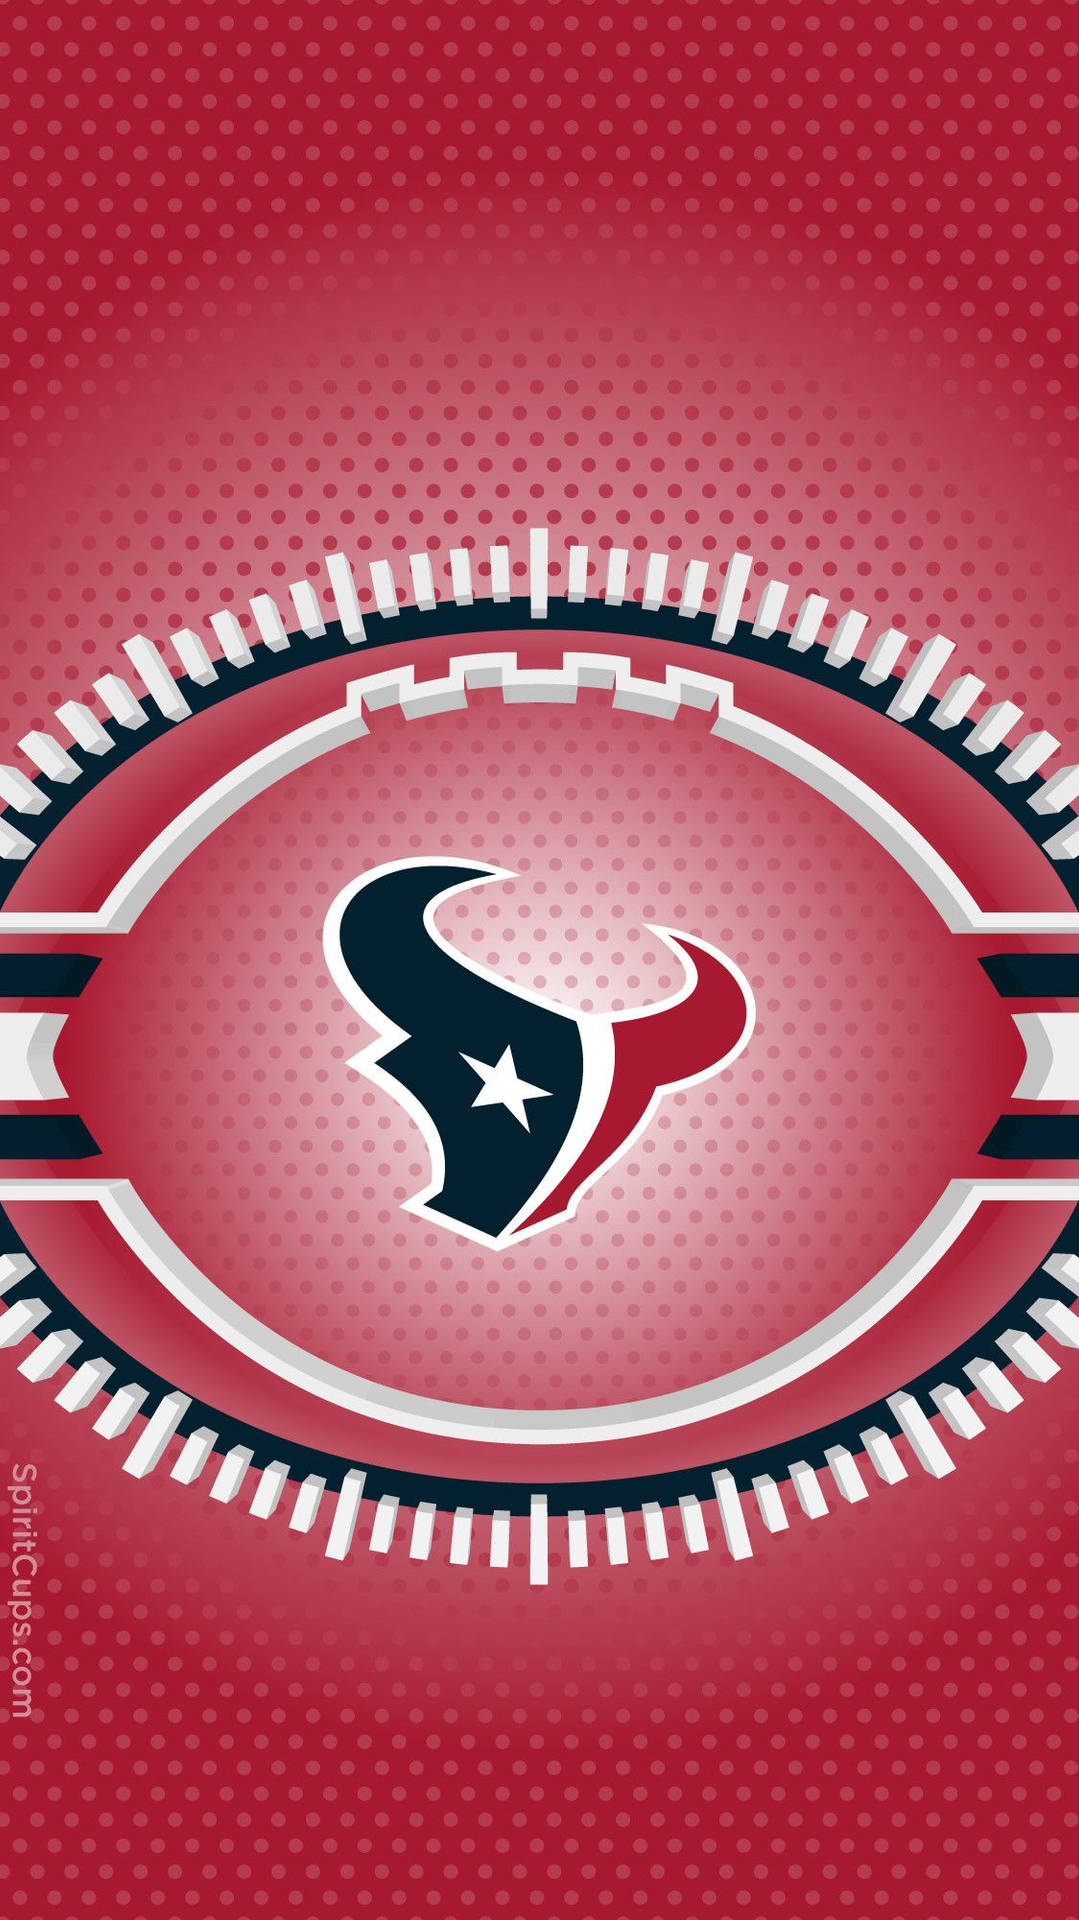 Super Bowl Contender: The Houston Texans are ready to take on the competition! Wallpaper